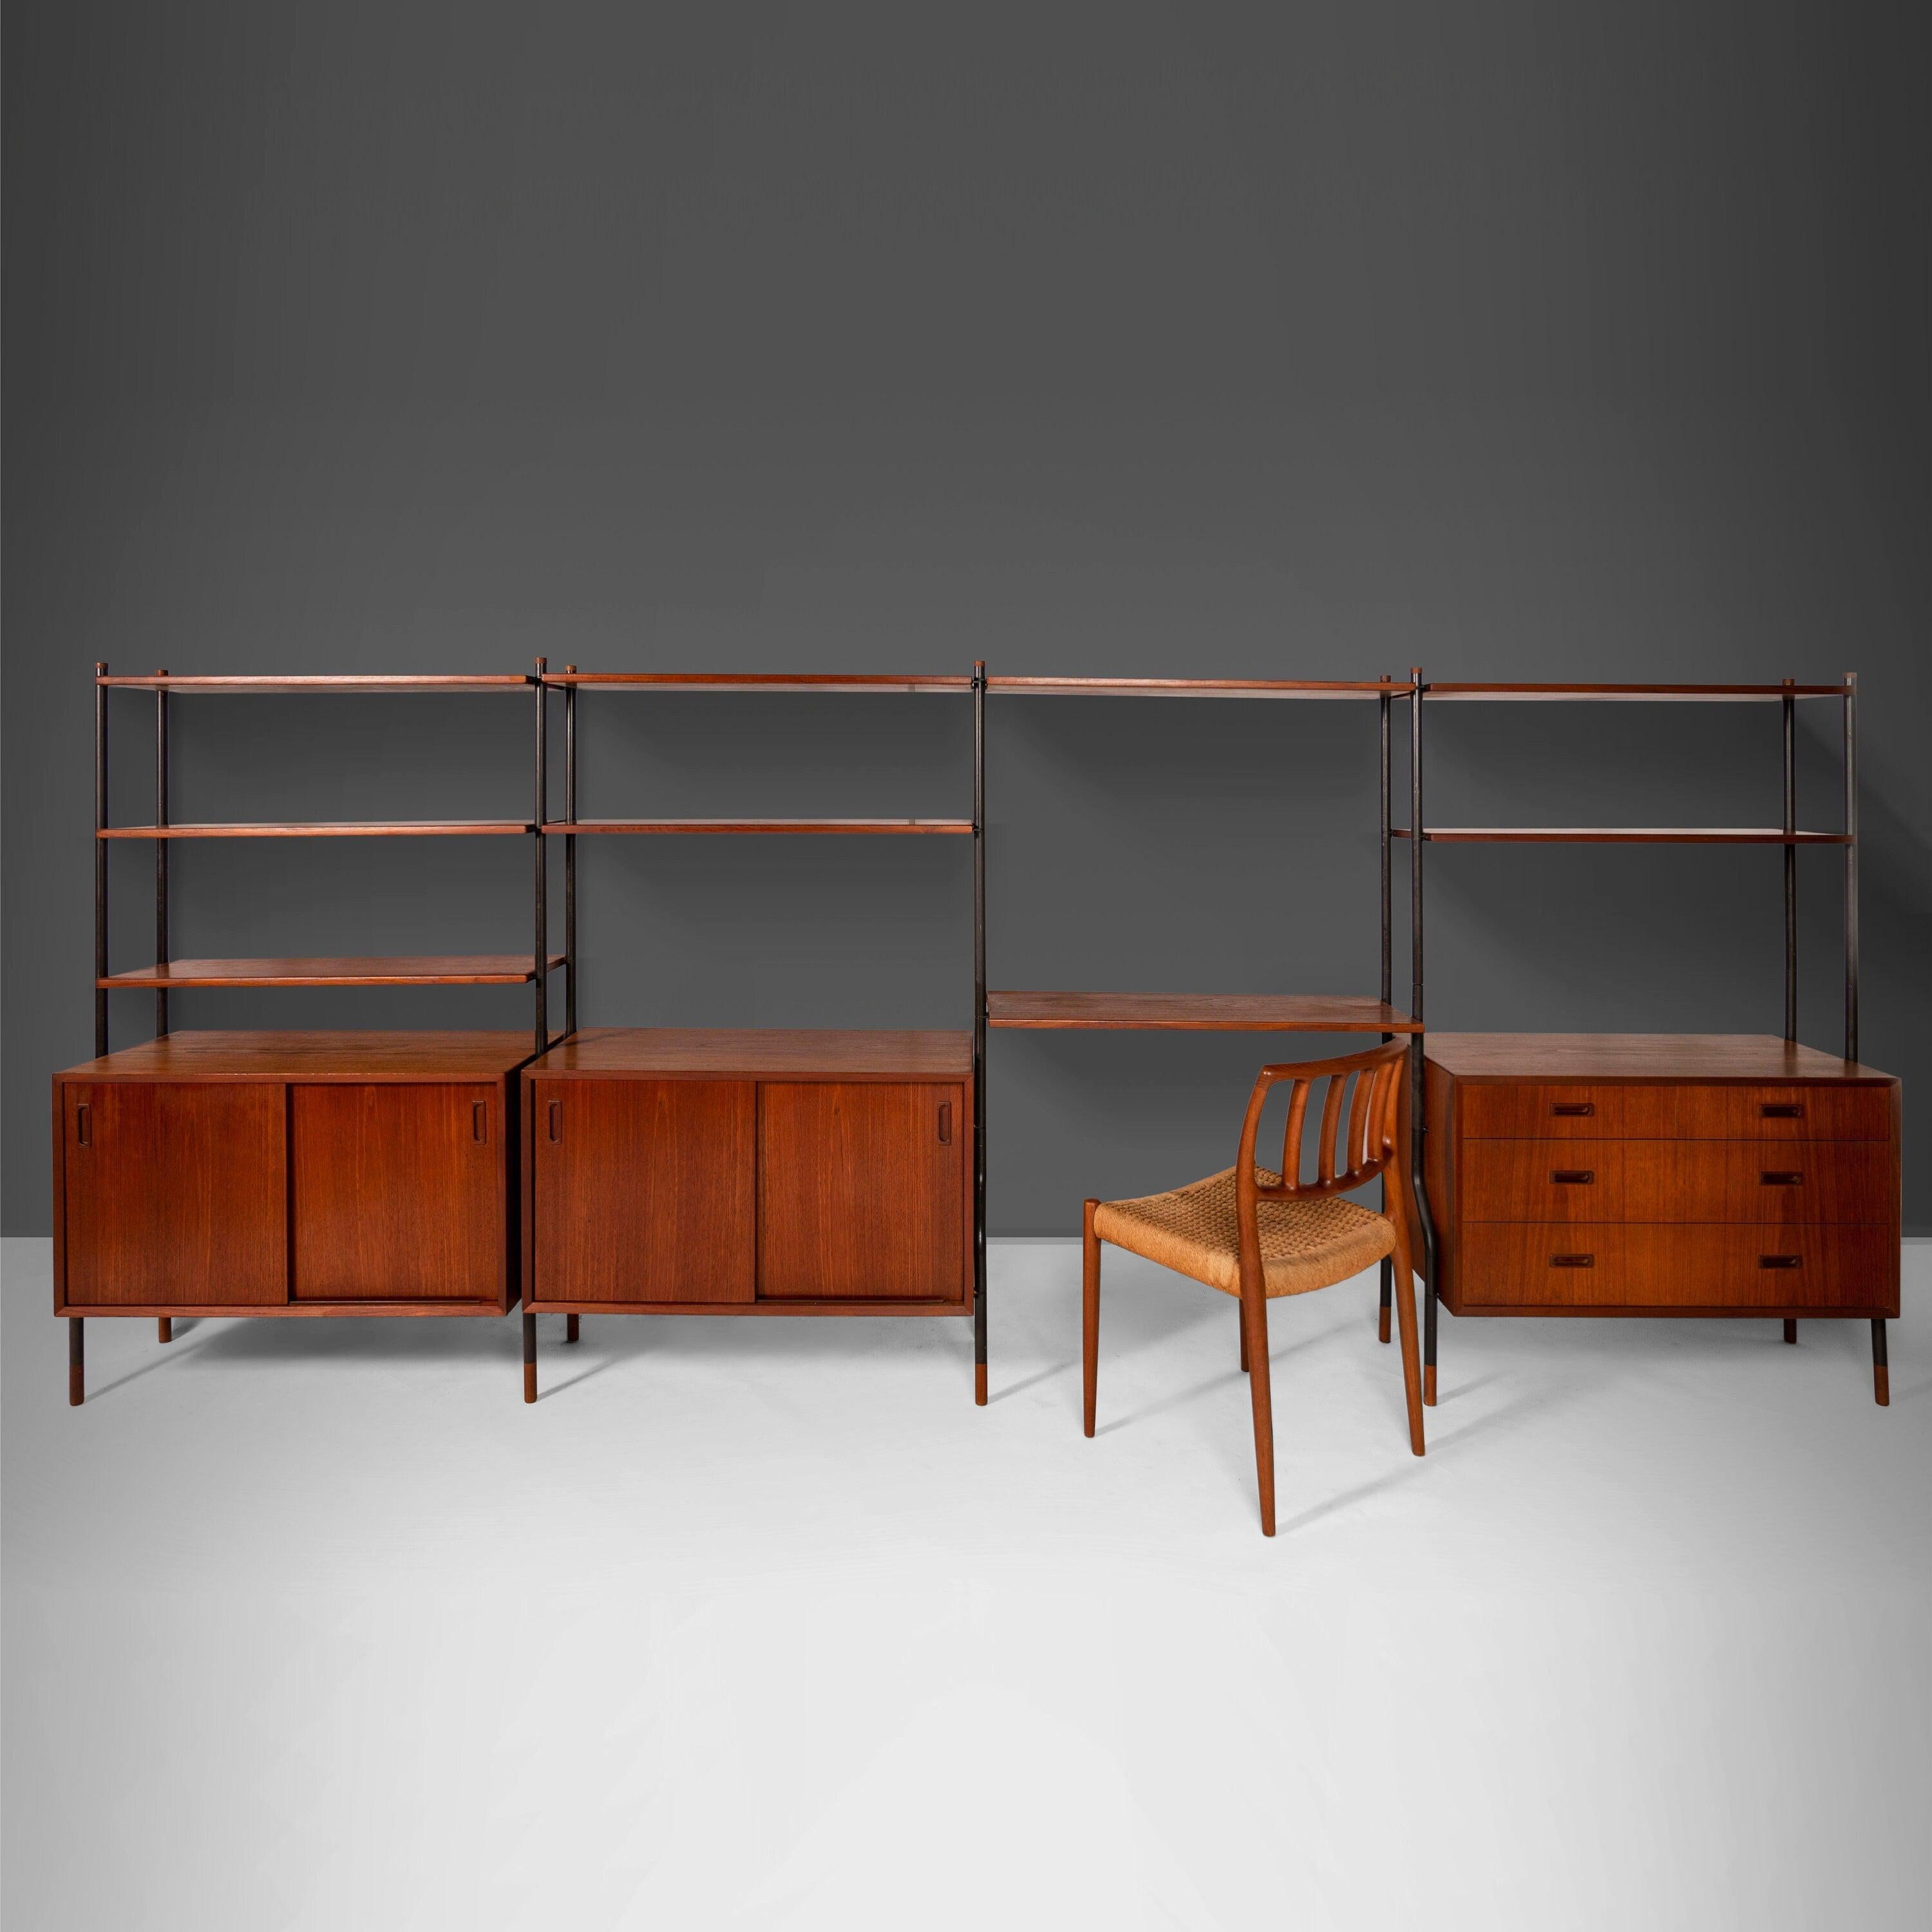 A rare find and truly an exceptional design is this wall unit by Lyby Mobler. The unit is assembled with steel poles, accented with teak caps. The unit can be adjusted to several configurations to best suit your space and/or daily use. The open